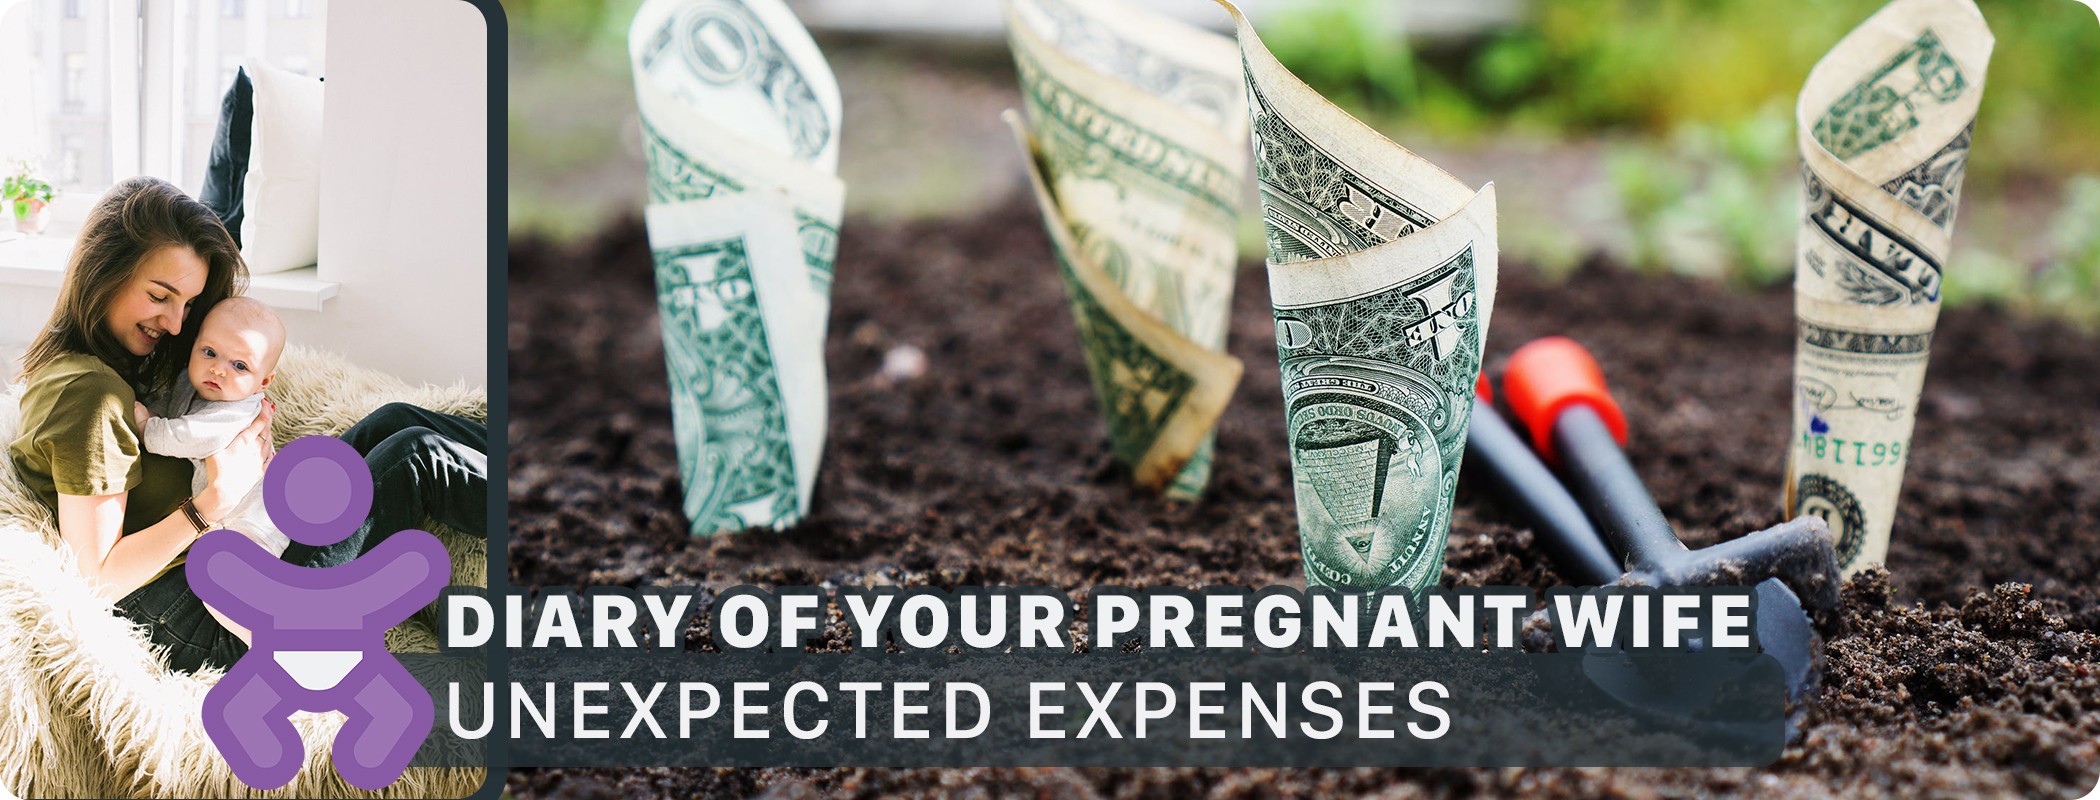 Diary of your pregnant wife - expenses